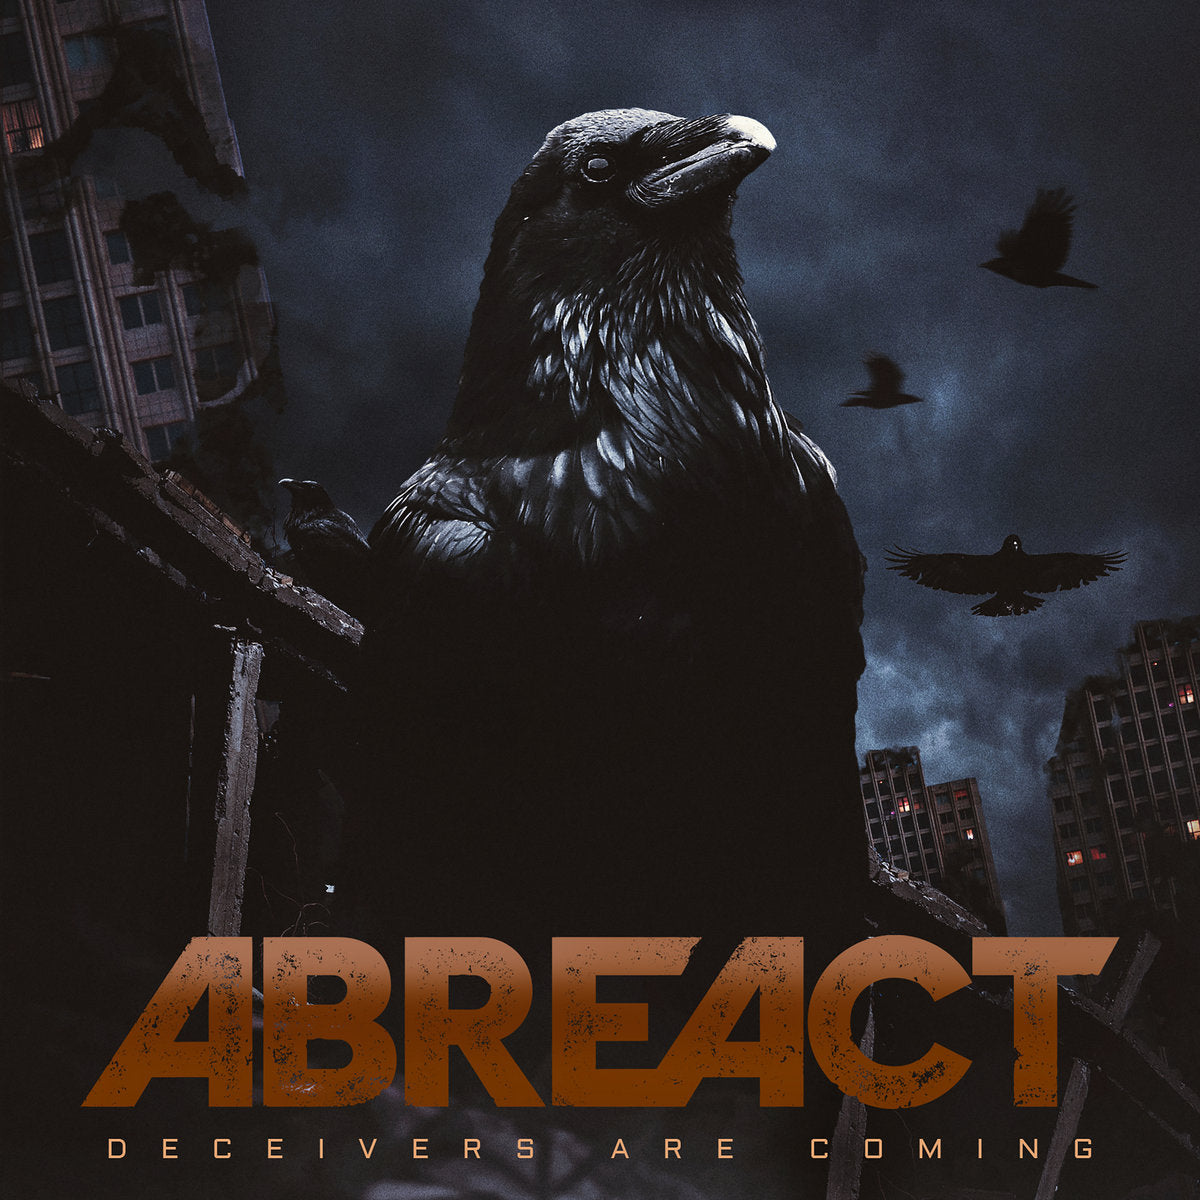 Abreact "Deceivers Are Coming" CD